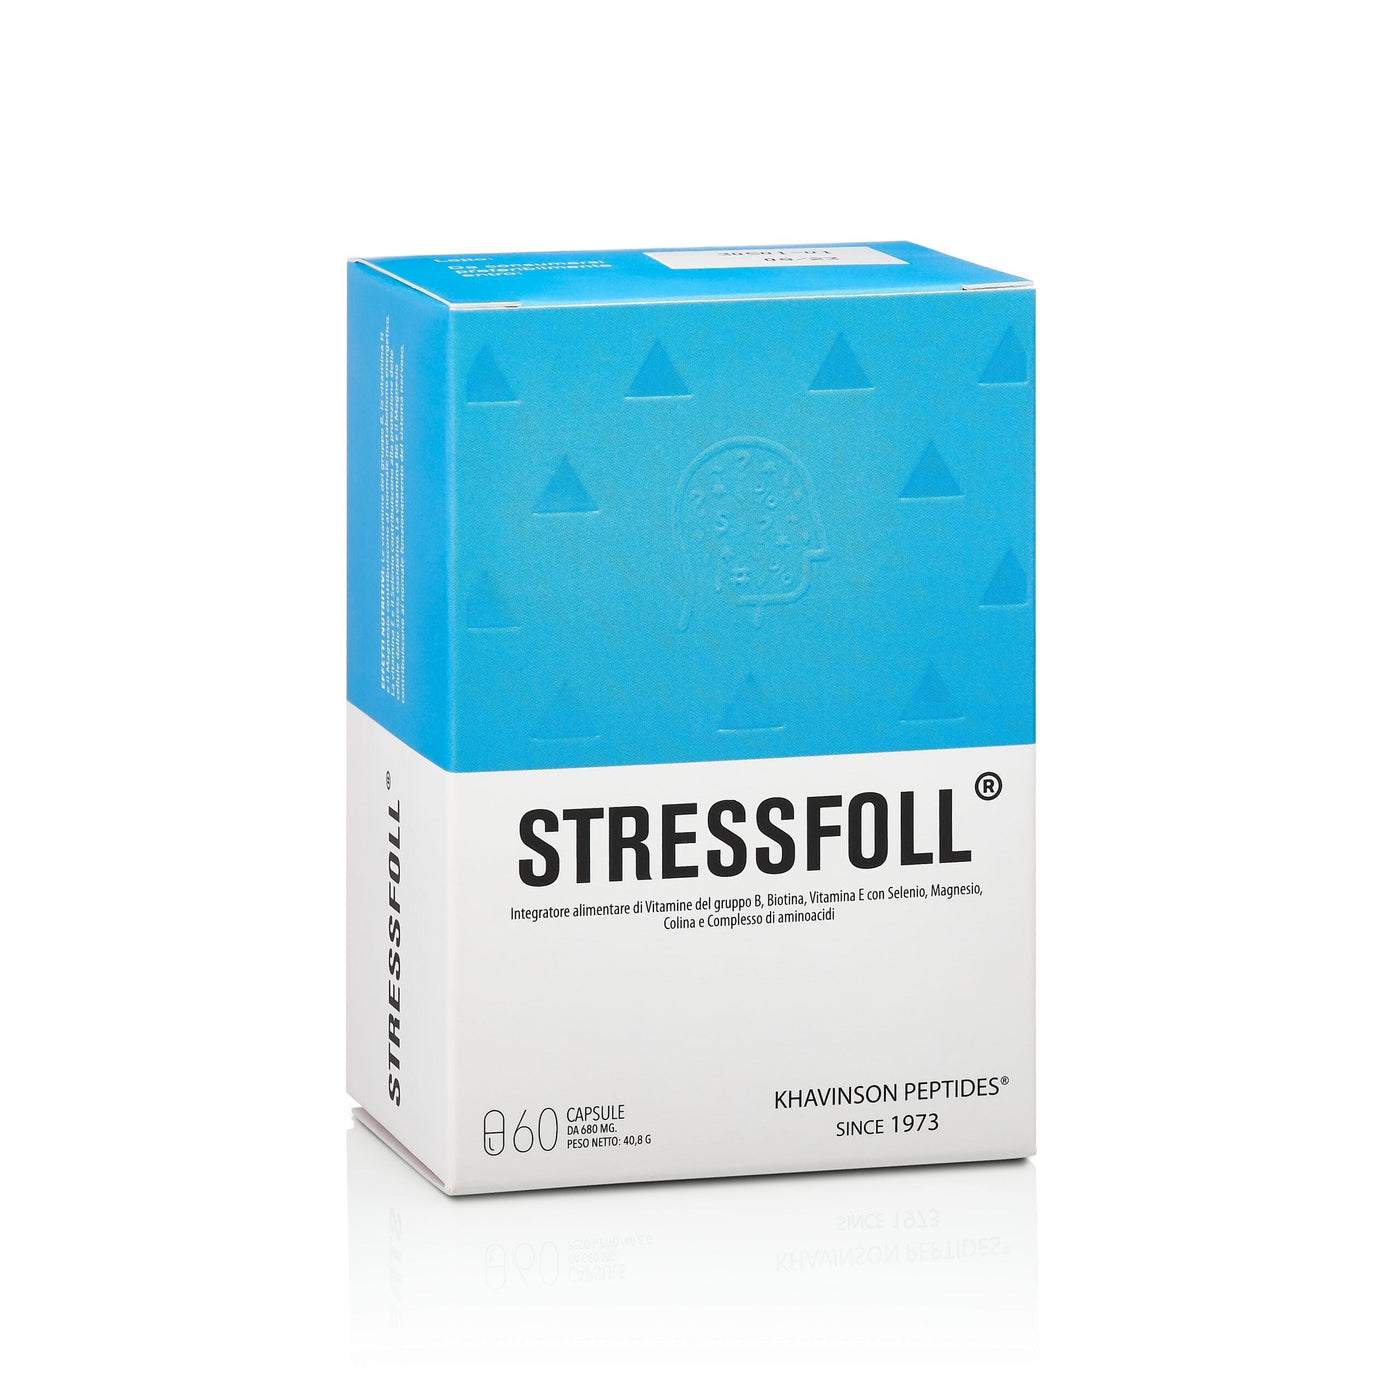 STRESSFOLL® Brain and Central Nervous System Synthetic Peptide Bioregulators - 60 Capsules